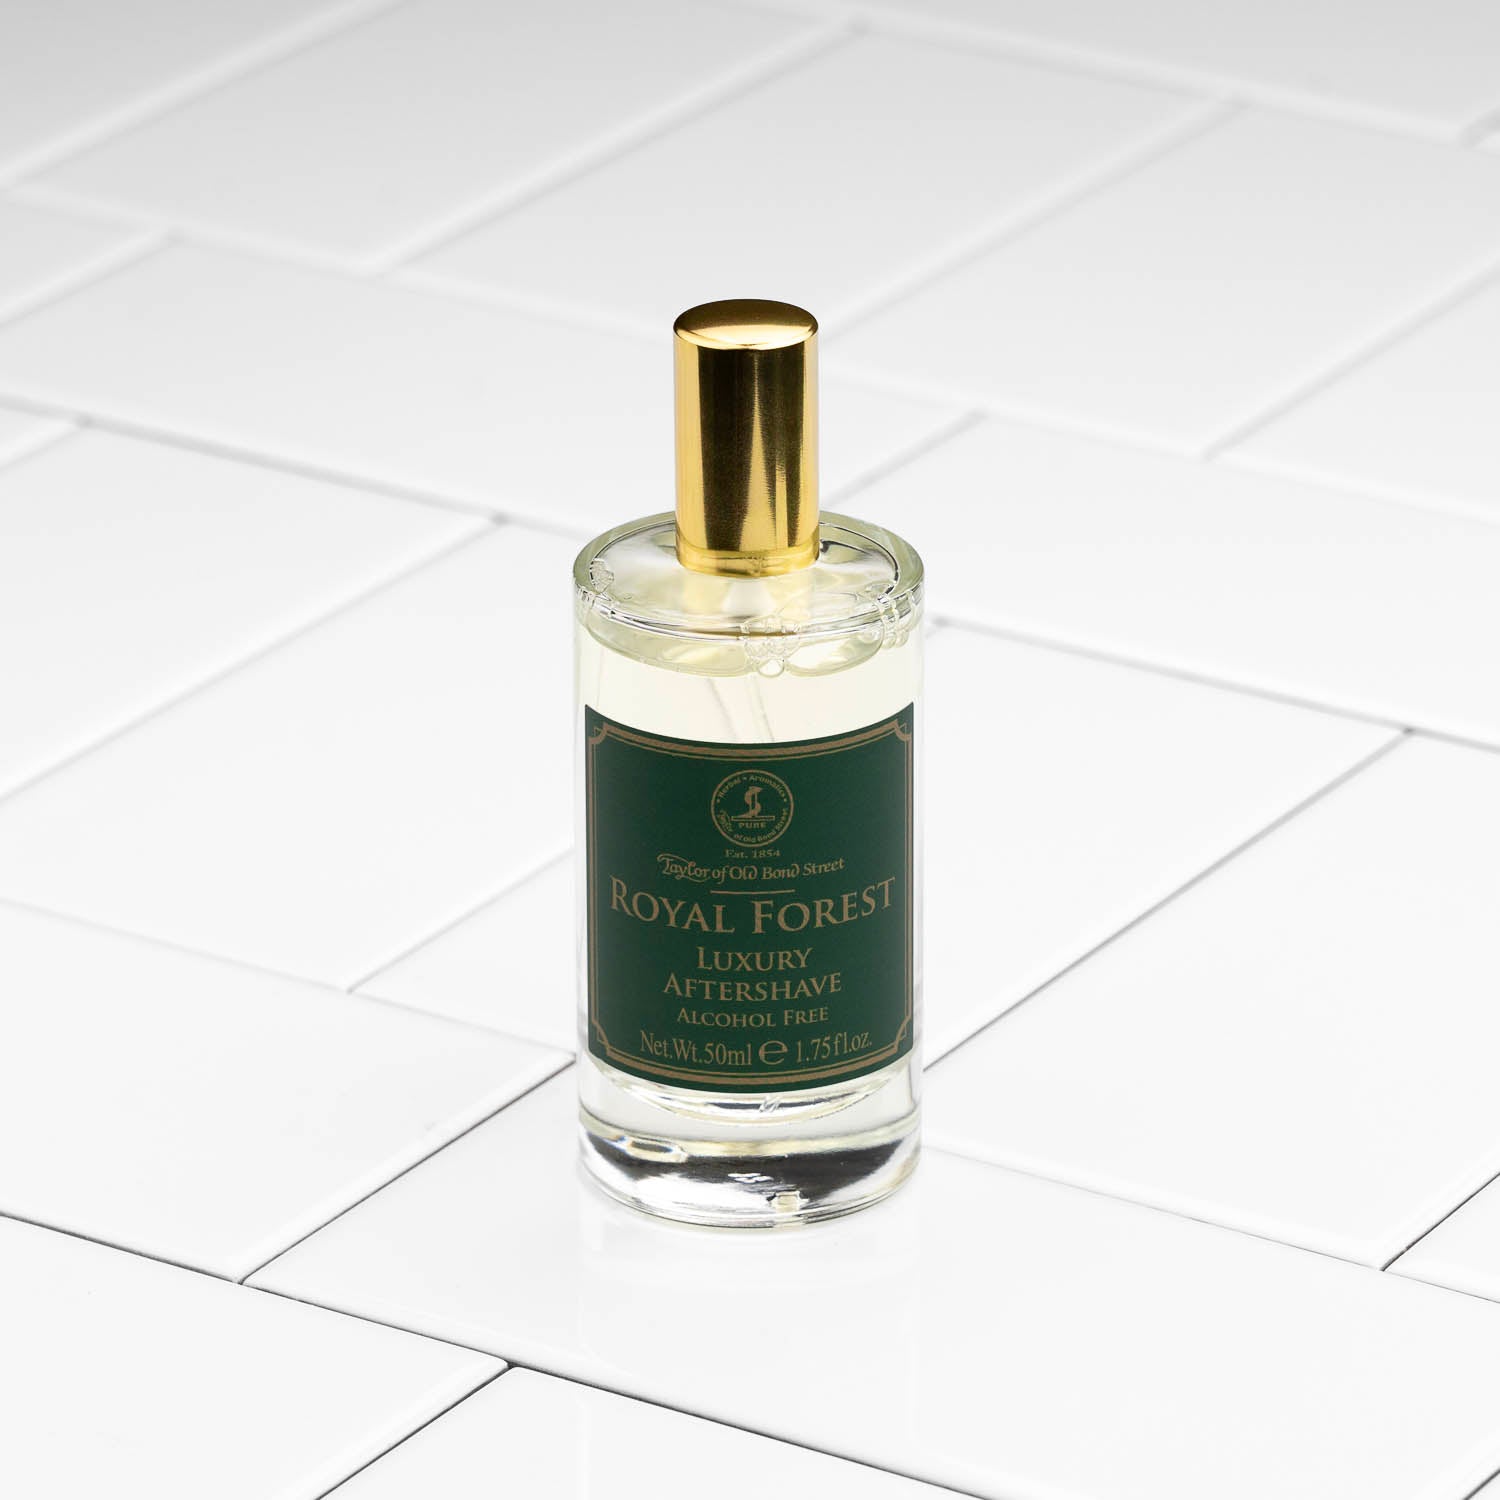 Taylor of Old of Lotion Aftershave from Street Old Bond Street Bond Forest Taylor Royal